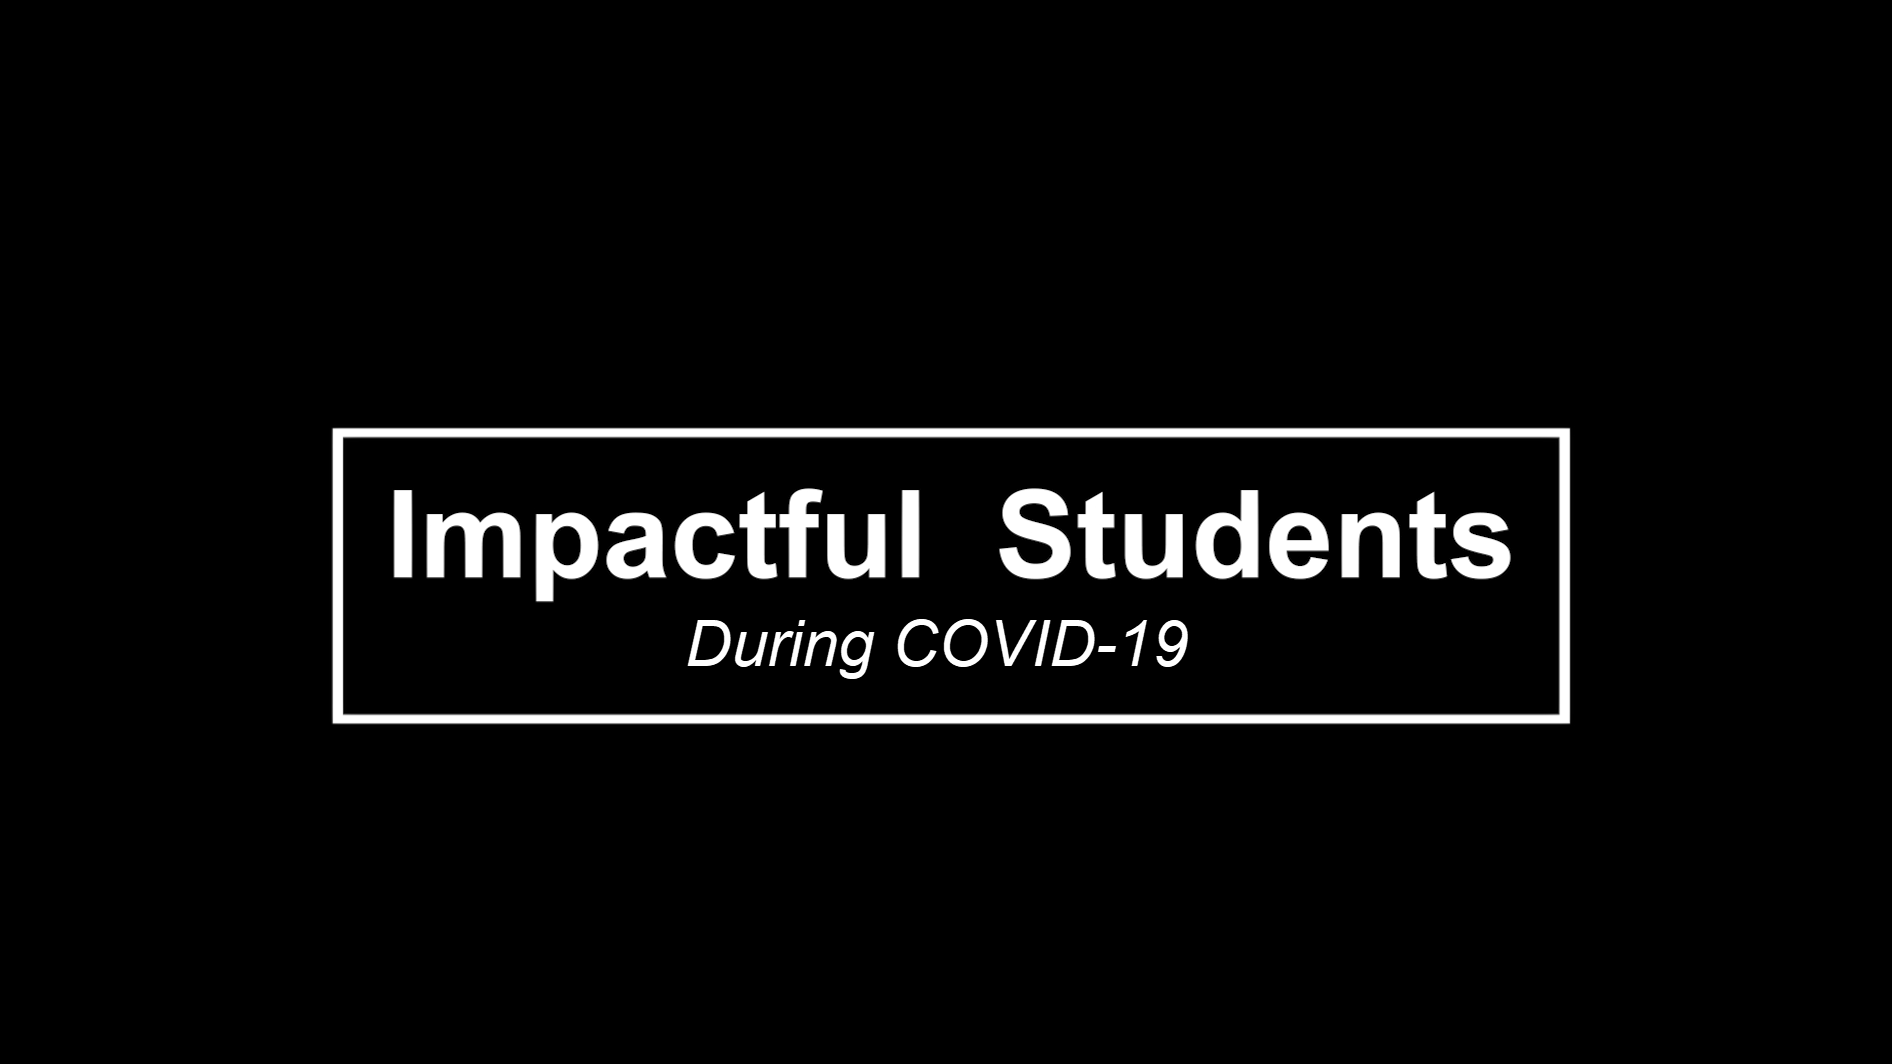 Impactful Students During COVID-19